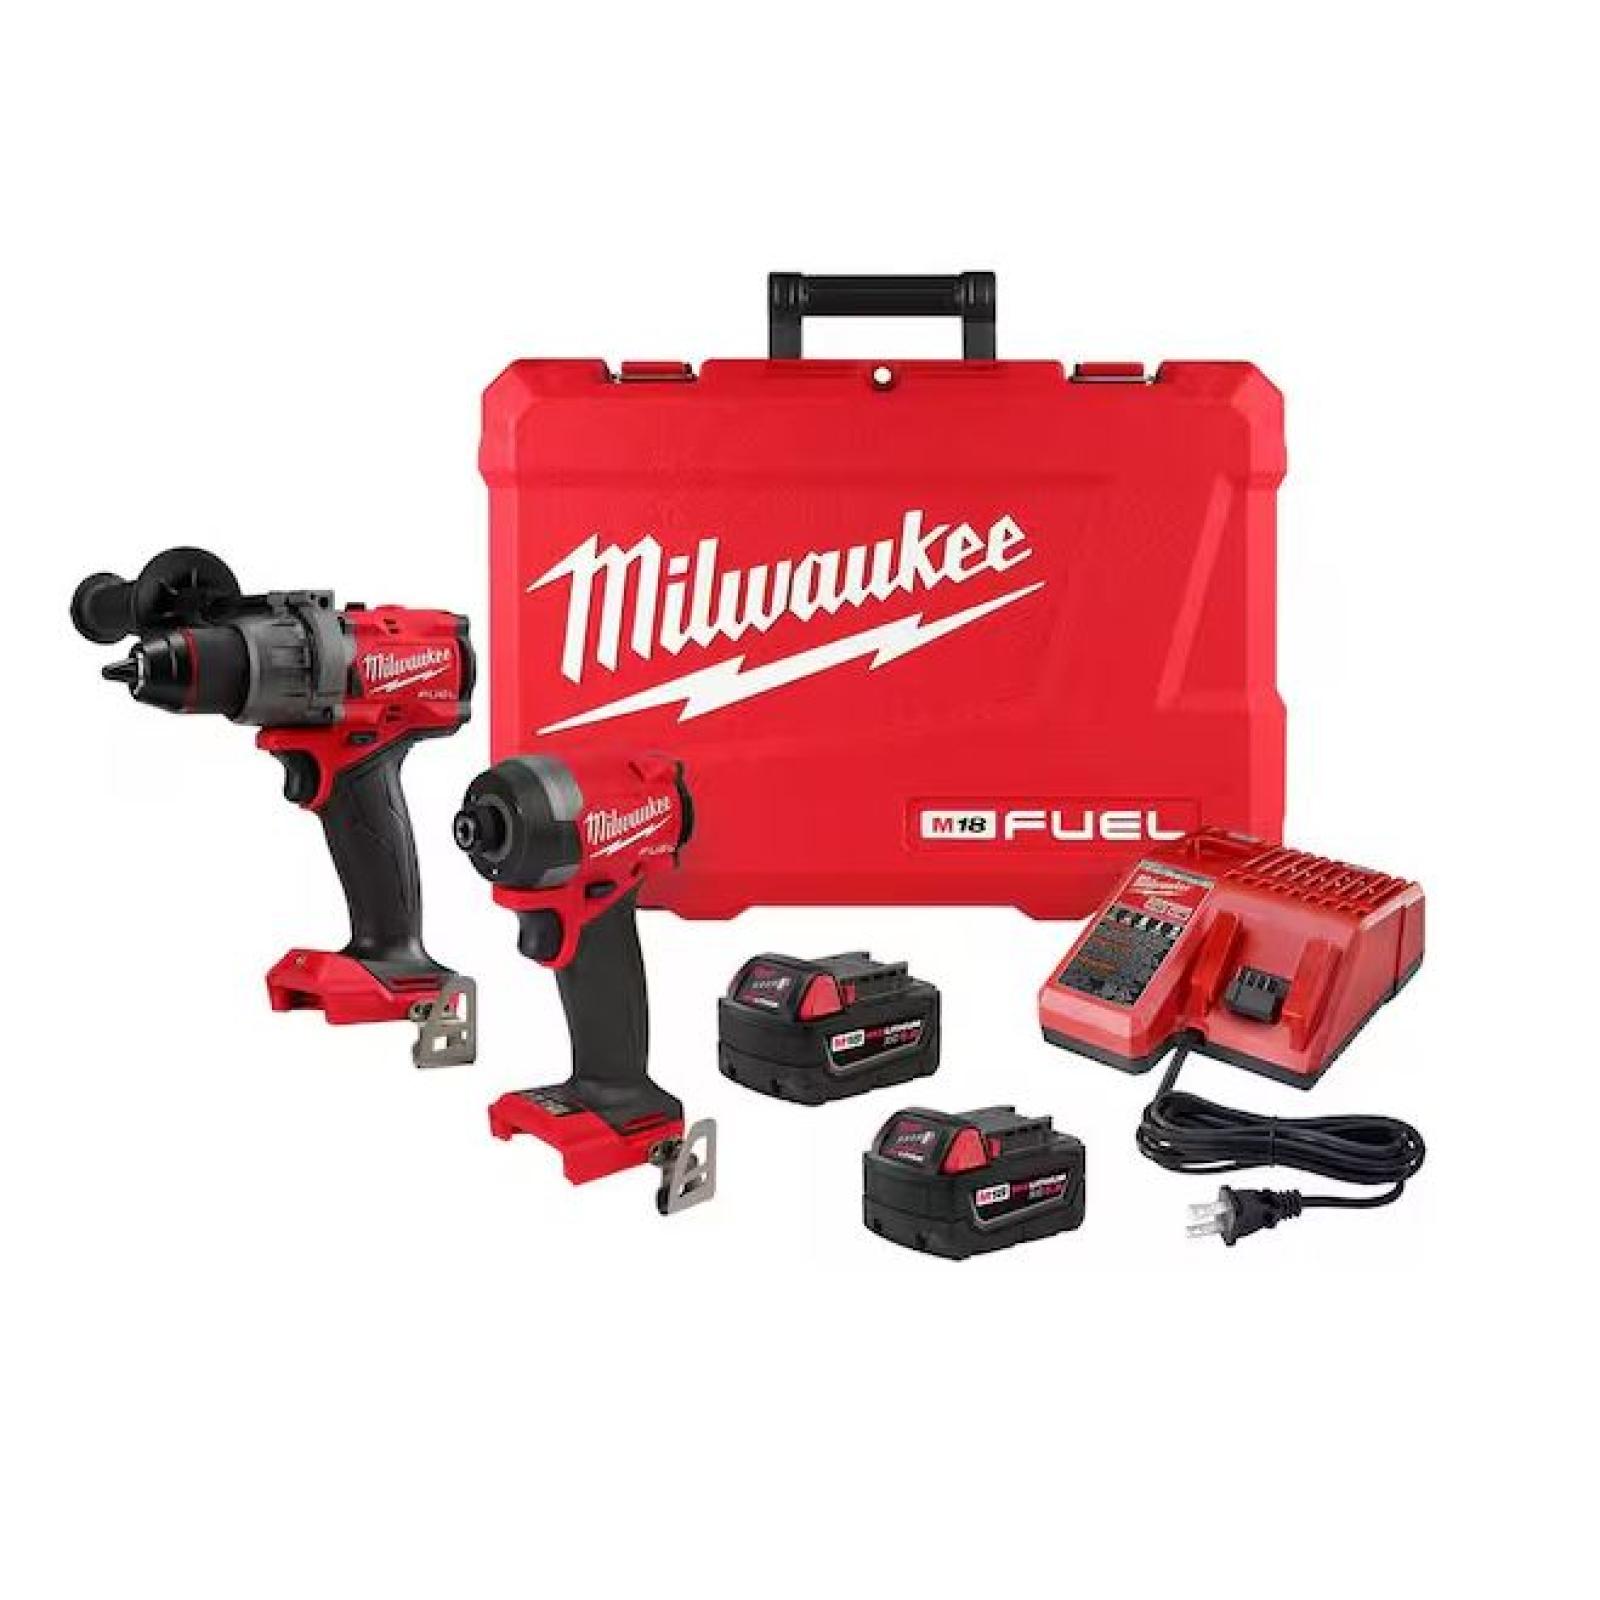 NEW! Milwaukee M18 FUEL Brushless Cordless Hammer Drill And Impact Driver (2-Tool) Combo Kit